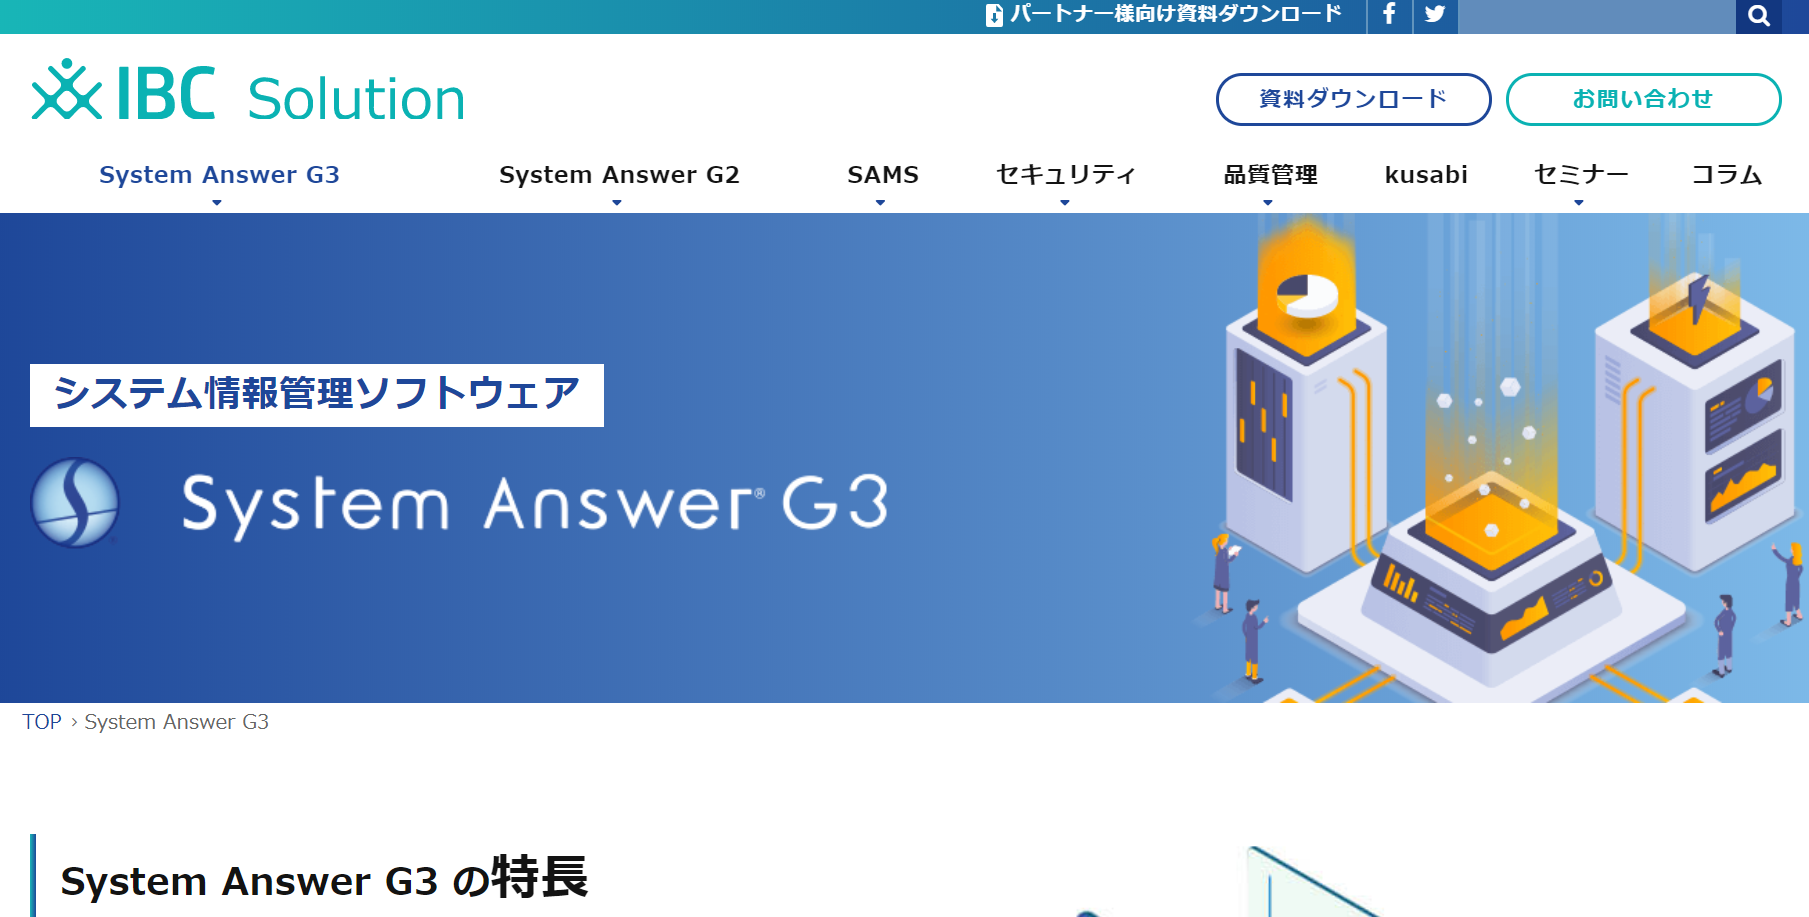 System Answer G3